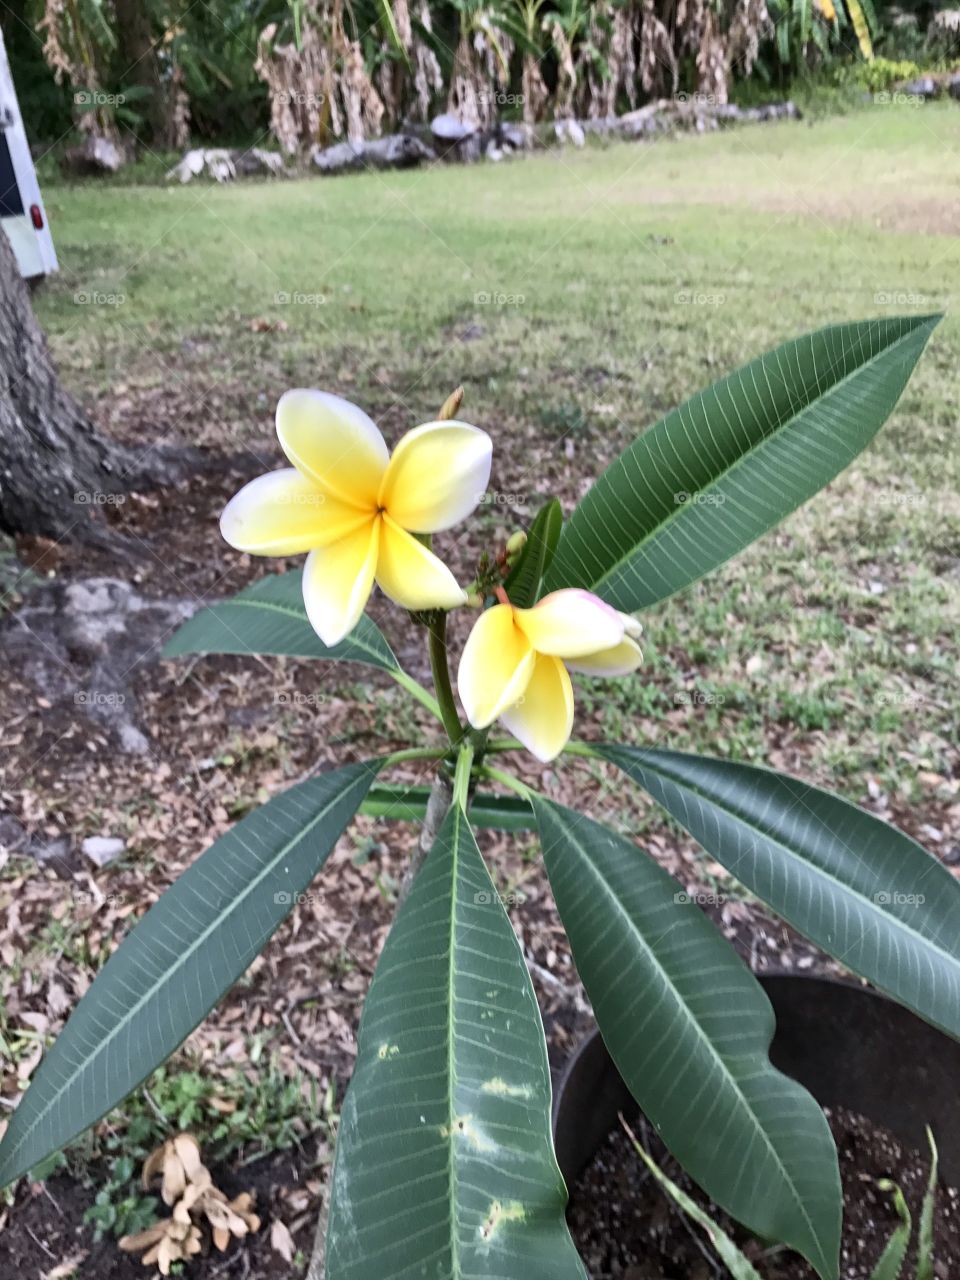 Flowers in Florida 